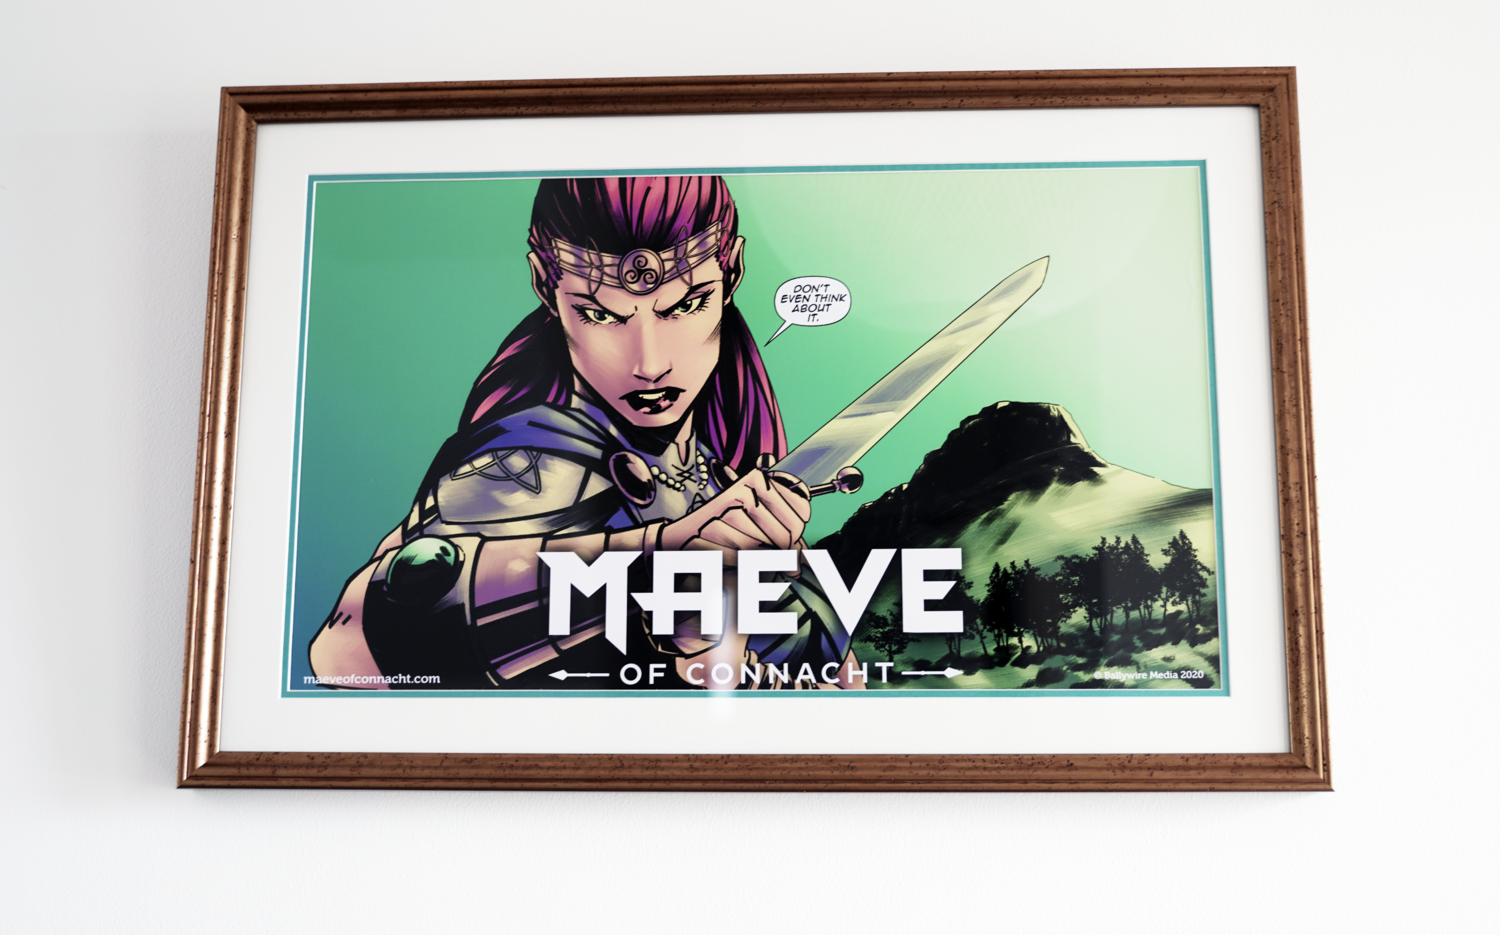 For The Person Who Has Everything - A Maeve